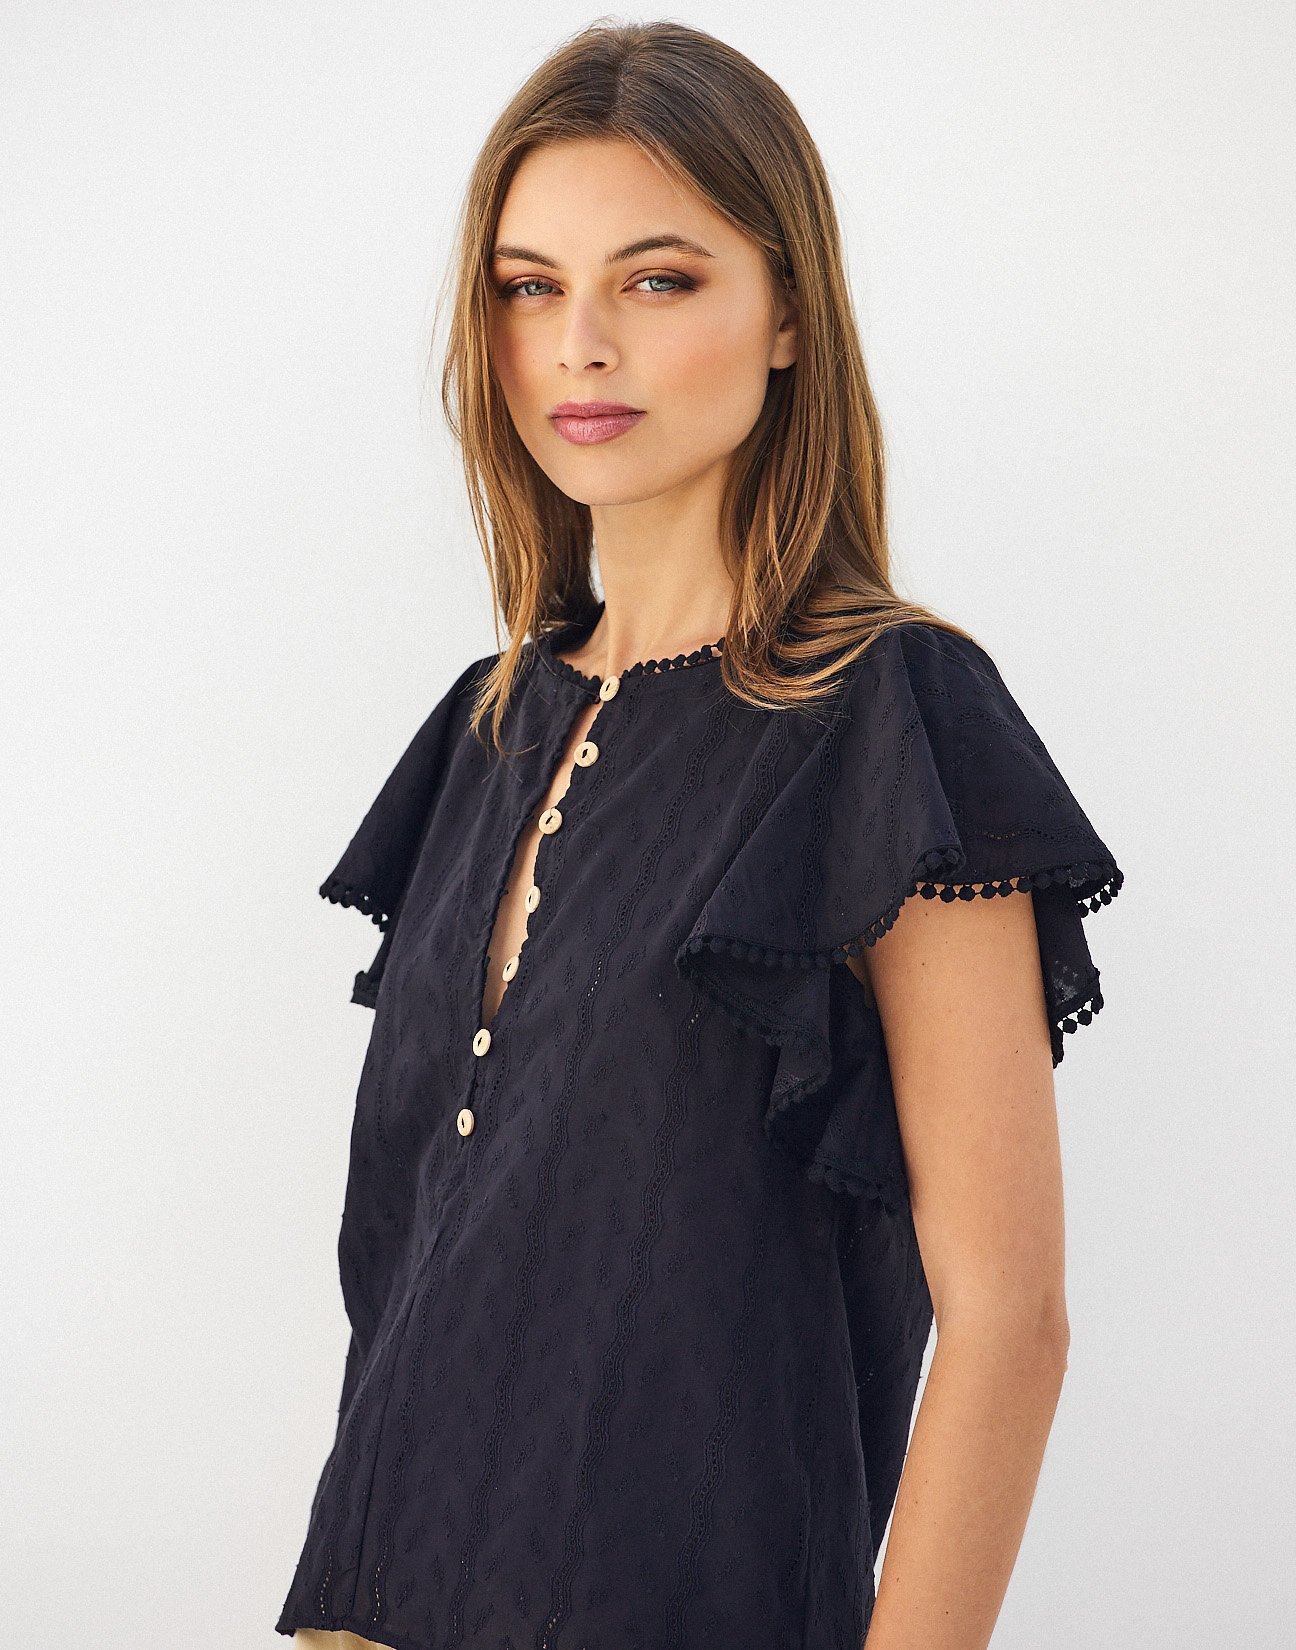 Ruffled embroidery blouse